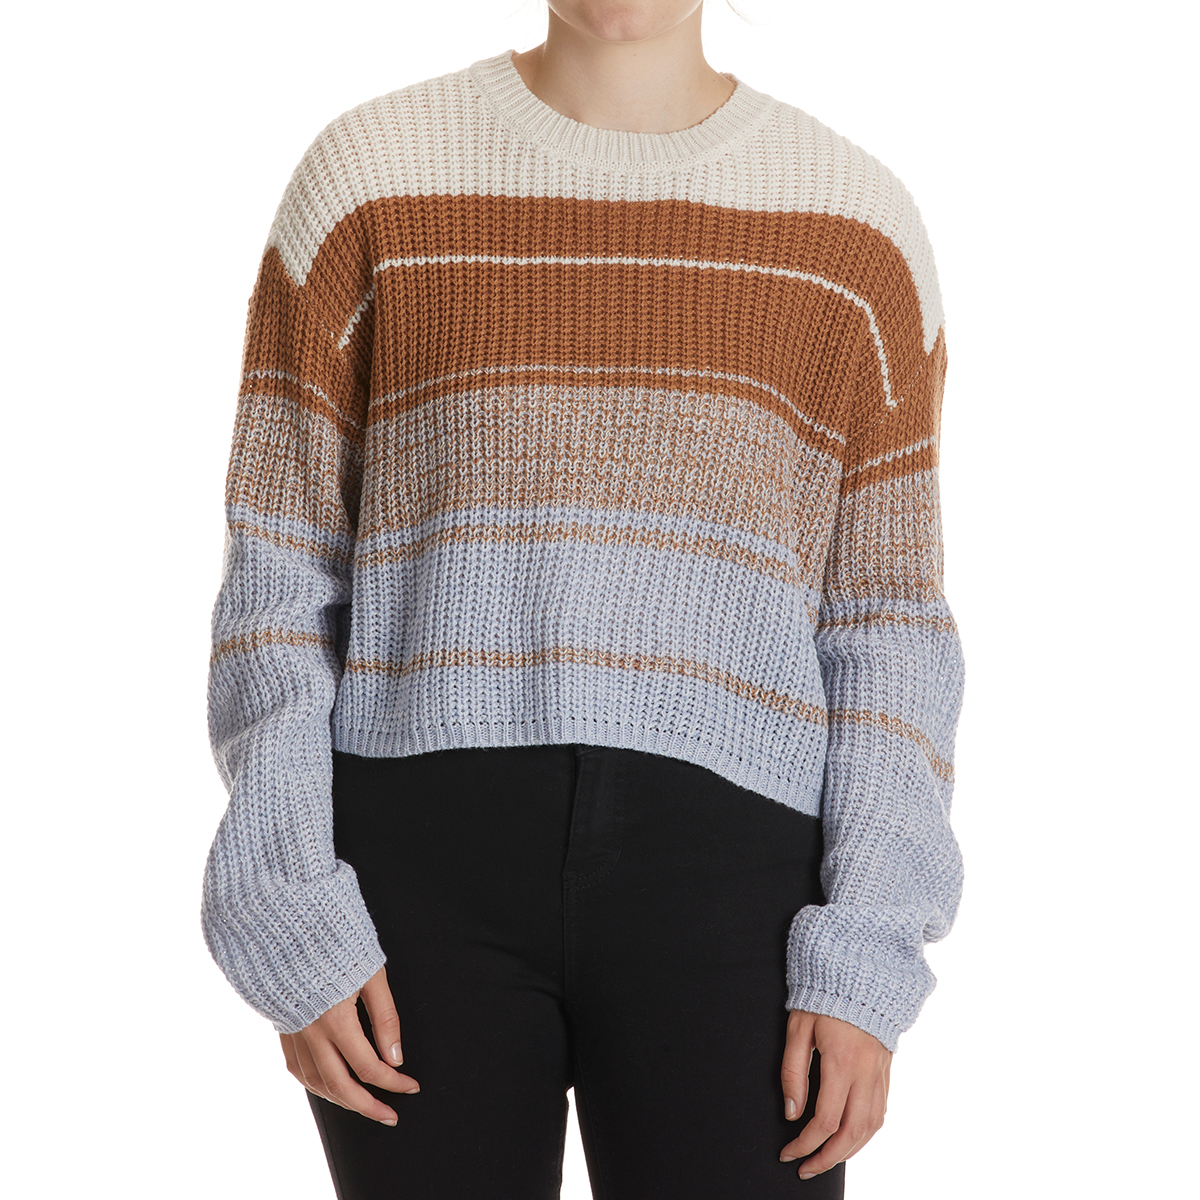 No Comment Juniors' Marled Pullover Sweater